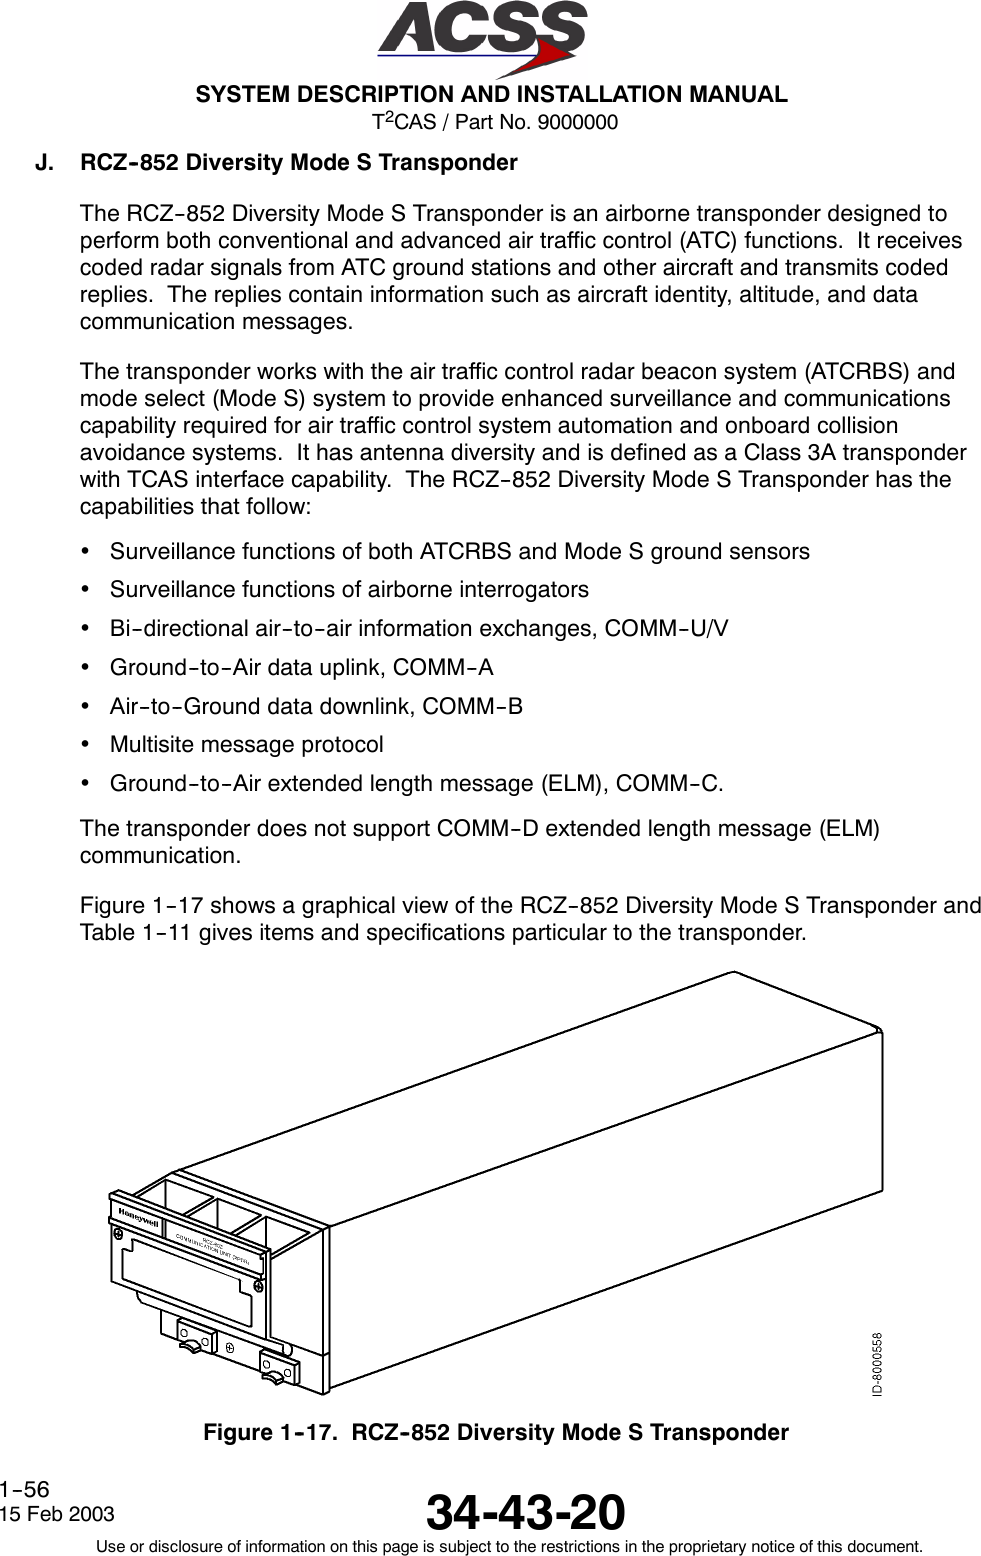 T2CAS / Part No. 9000000SYSTEM DESCRIPTION AND INSTALLATION MANUAL34-43-2015 Feb 2003Use or disclosure of information on this page is subject to the restrictions in the proprietary notice of this document.1--56J. RCZ--852 Diversity Mode S TransponderThe RCZ--852 Diversity Mode S Transponder is an airborne transponder designed toperform both conventional and advanced air traffic control (ATC) functions. It receivescoded radar signals from ATC ground stations and other aircraft and transmits codedreplies. The replies contain information such as aircraft identity, altitude, and datacommunication messages.The transponder works with the air traffic control radar beacon system (ATCRBS) andmode select (Mode S) system to provide enhanced surveillance and communicationscapability required for air traffic control system automation and onboard collisionavoidance systems. It has antenna diversity and is defined as a Class 3A transponderwith TCAS interface capability. The RCZ--852 Diversity Mode S Transponder has thecapabilities that follow:•Surveillance functions of both ATCRBS and Mode S ground sensors•Surveillance functions of airborne interrogators•Bi--directional air--to--air information exchanges, COMM--U/V•Ground--to--Air data uplink, COMM--A•Air--to--Ground data downlink, COMM--B•Multisite message protocol•Ground--to--Air extended length message (ELM), COMM--C.The transponder does not support COMM--D extended length message (ELM)communication.Figure 1--17 shows a graphical view of the RCZ--852 Diversity Mode S Transponder andTable 1--11 gives items and specifications particular to the transponder.Figure 1--17. RCZ--852 Diversity Mode S Transponder